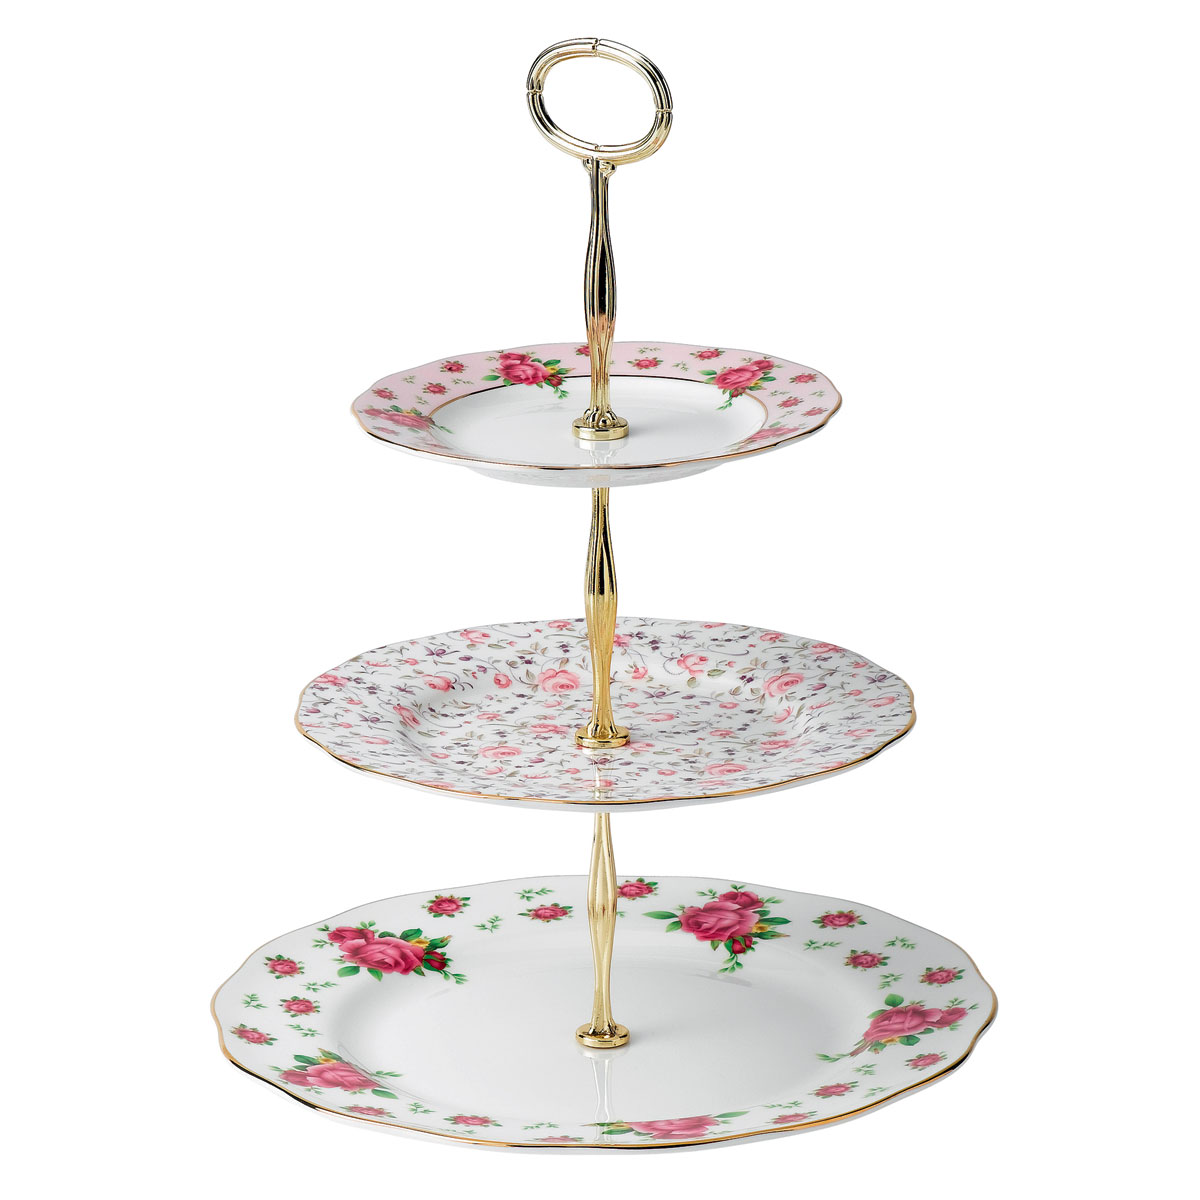 Royal Albert China New Country Roses White, Vintage Formal 3 Tier Stand - White, Pink and Confetti